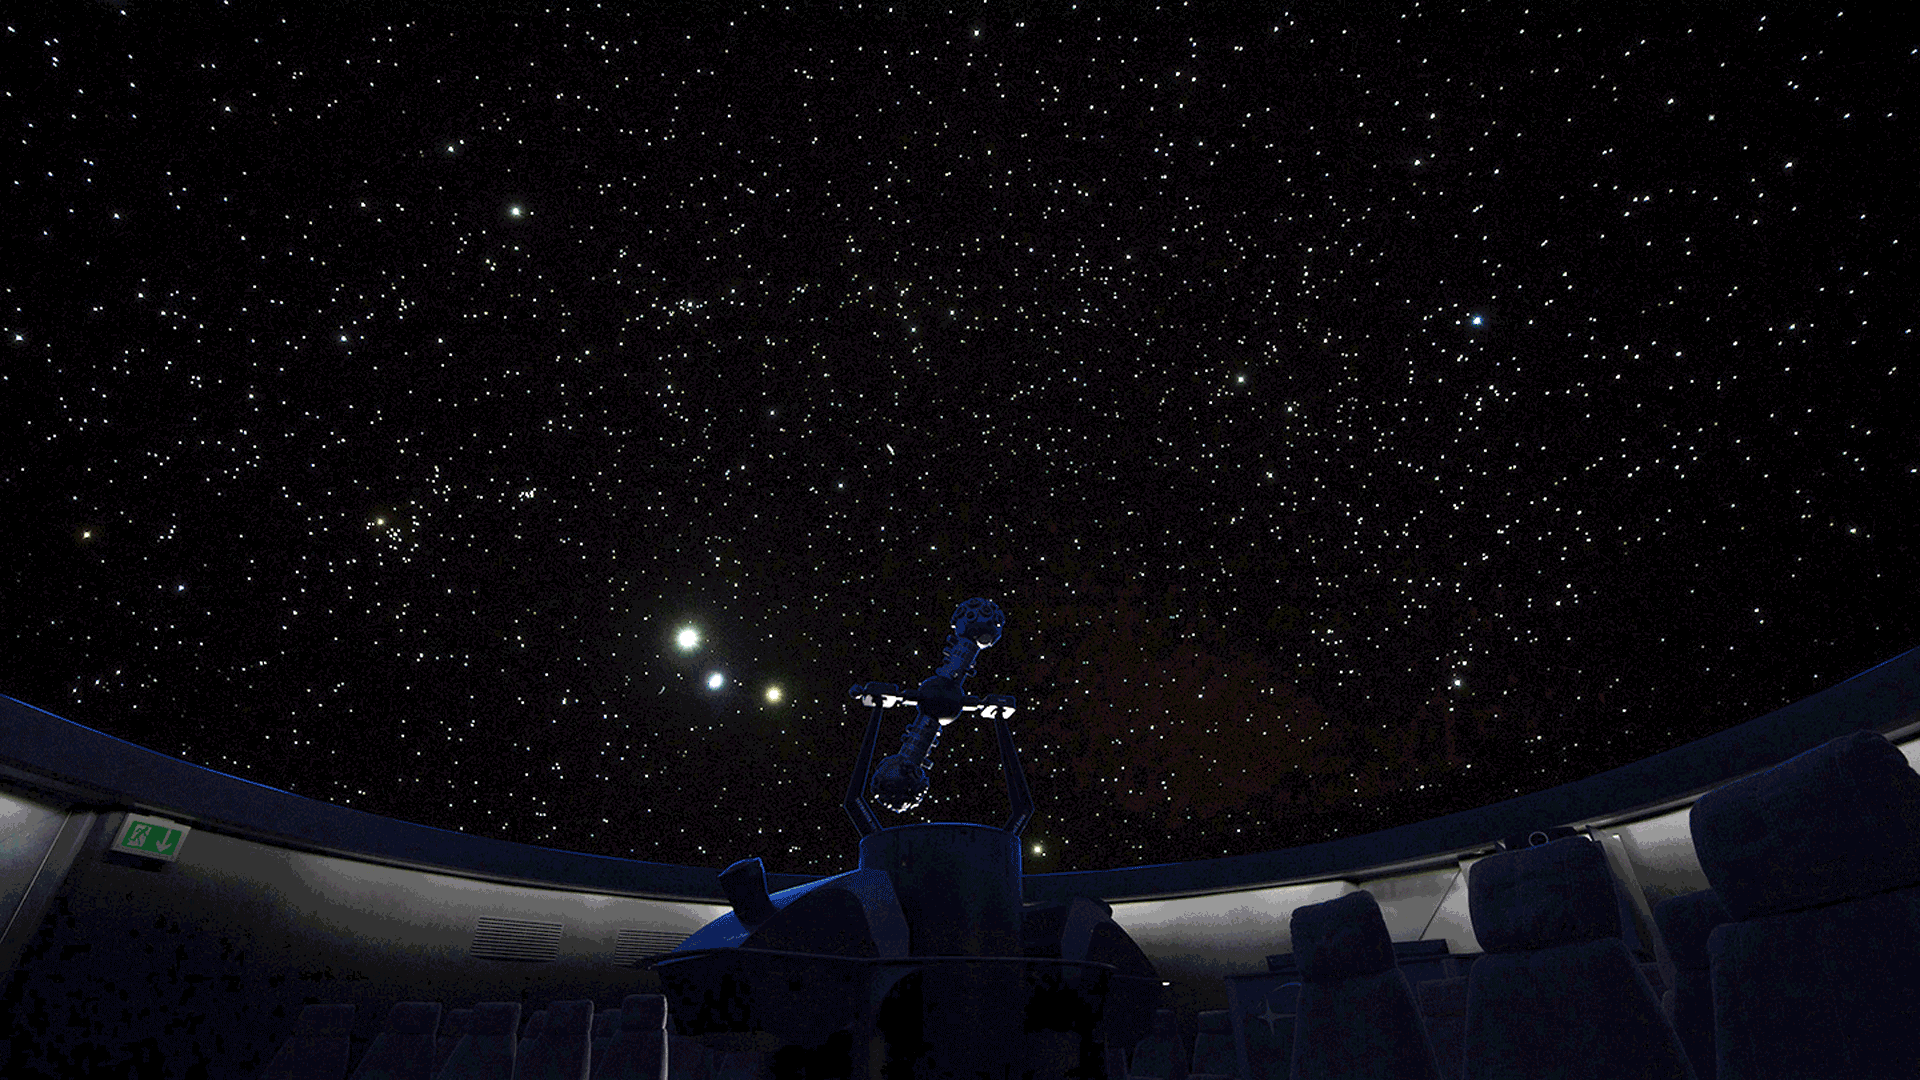 100 years ago – in 1923 – the first artificial stars shone in a planetarium that ZEISS constructed for the Deutsches Museum in Munich.